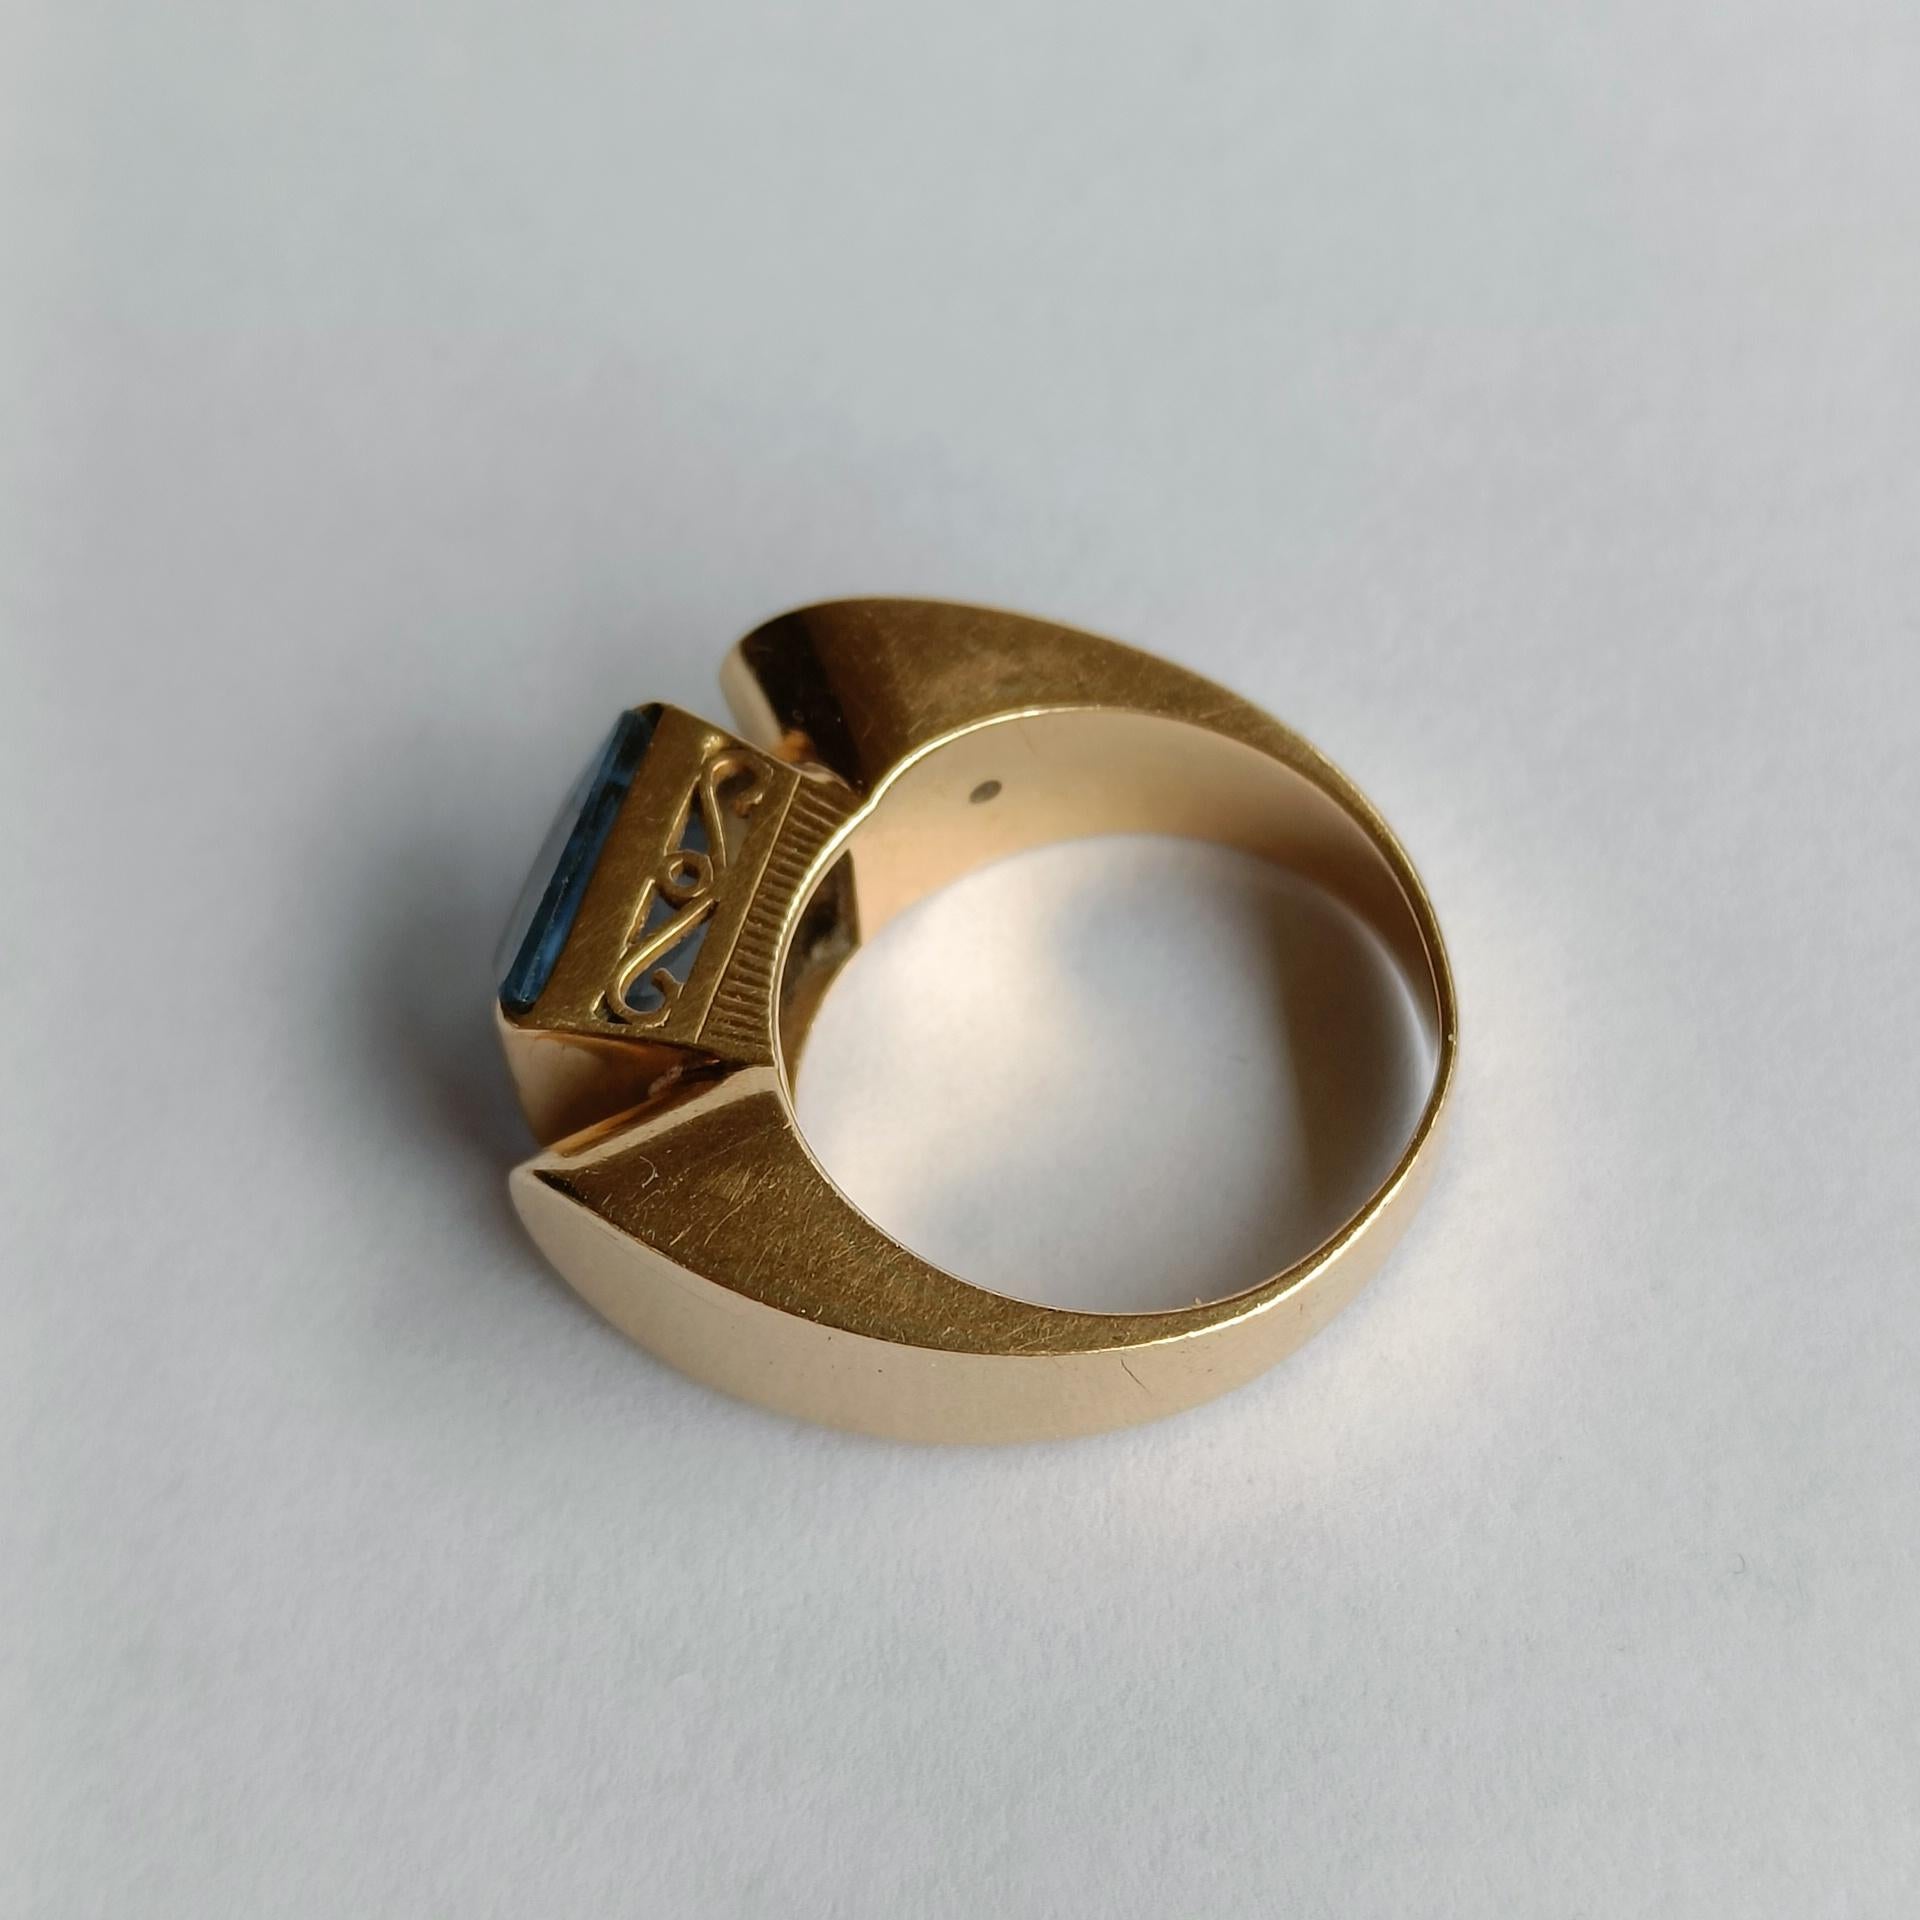 Chunky Art Deco 18k Gold Ring with Aquamarine - Sweden 1940s For Sale 1